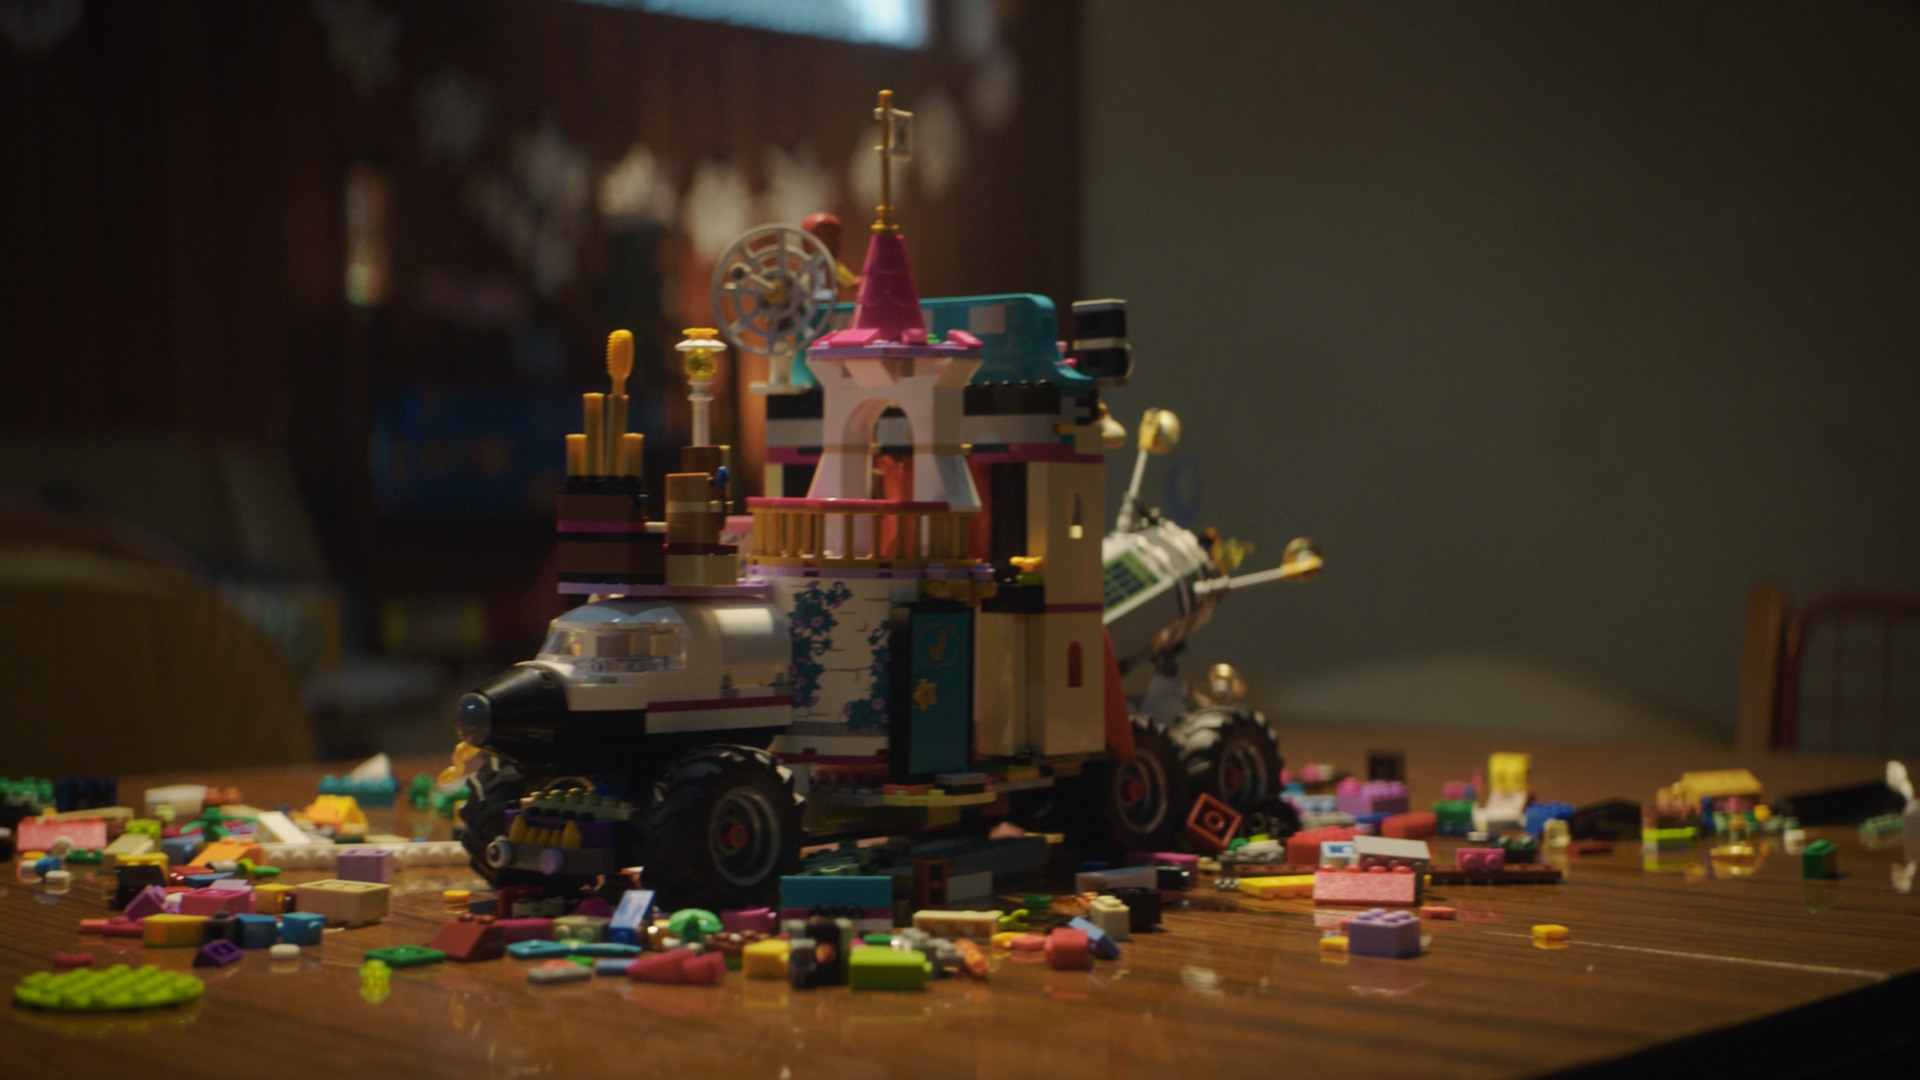 News & Views - Family, Friendship and Filmmaking in The LEGO